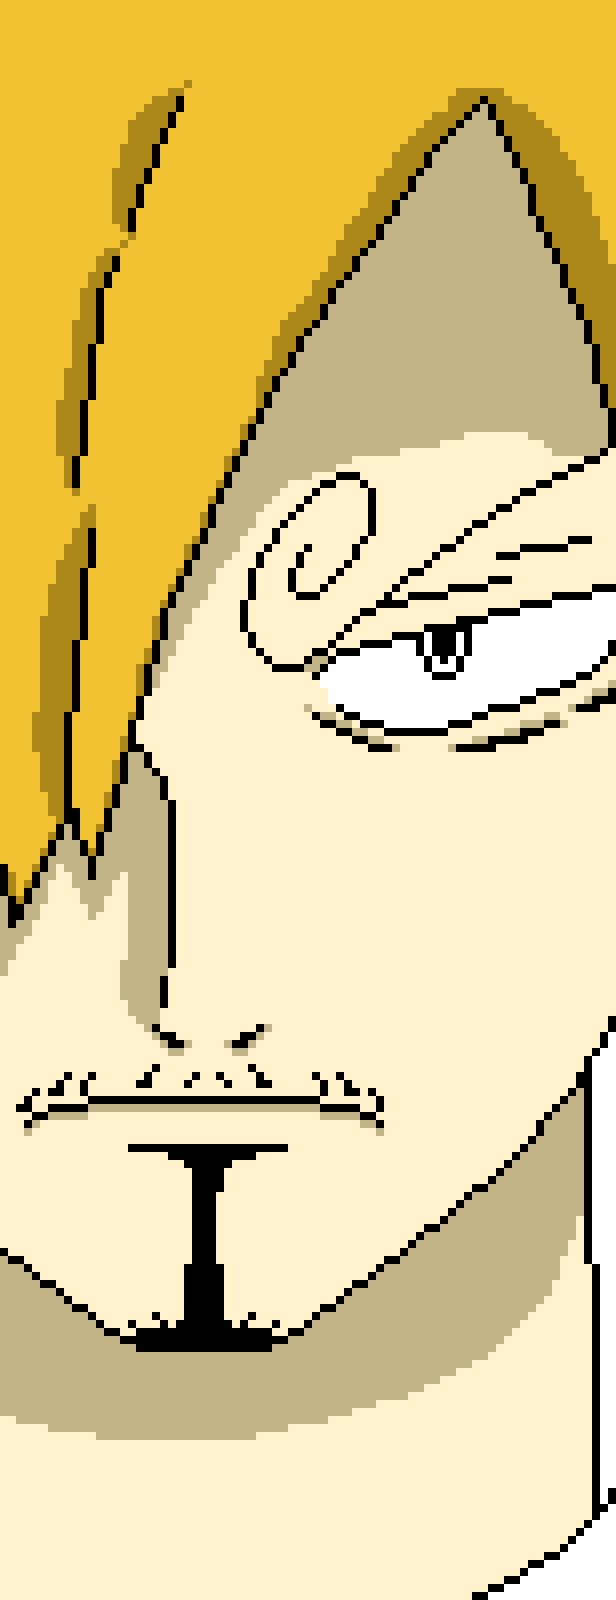 Sanji (One Piece) Pixel art for @the_master_of_pixel_art (the old image was made by him too)